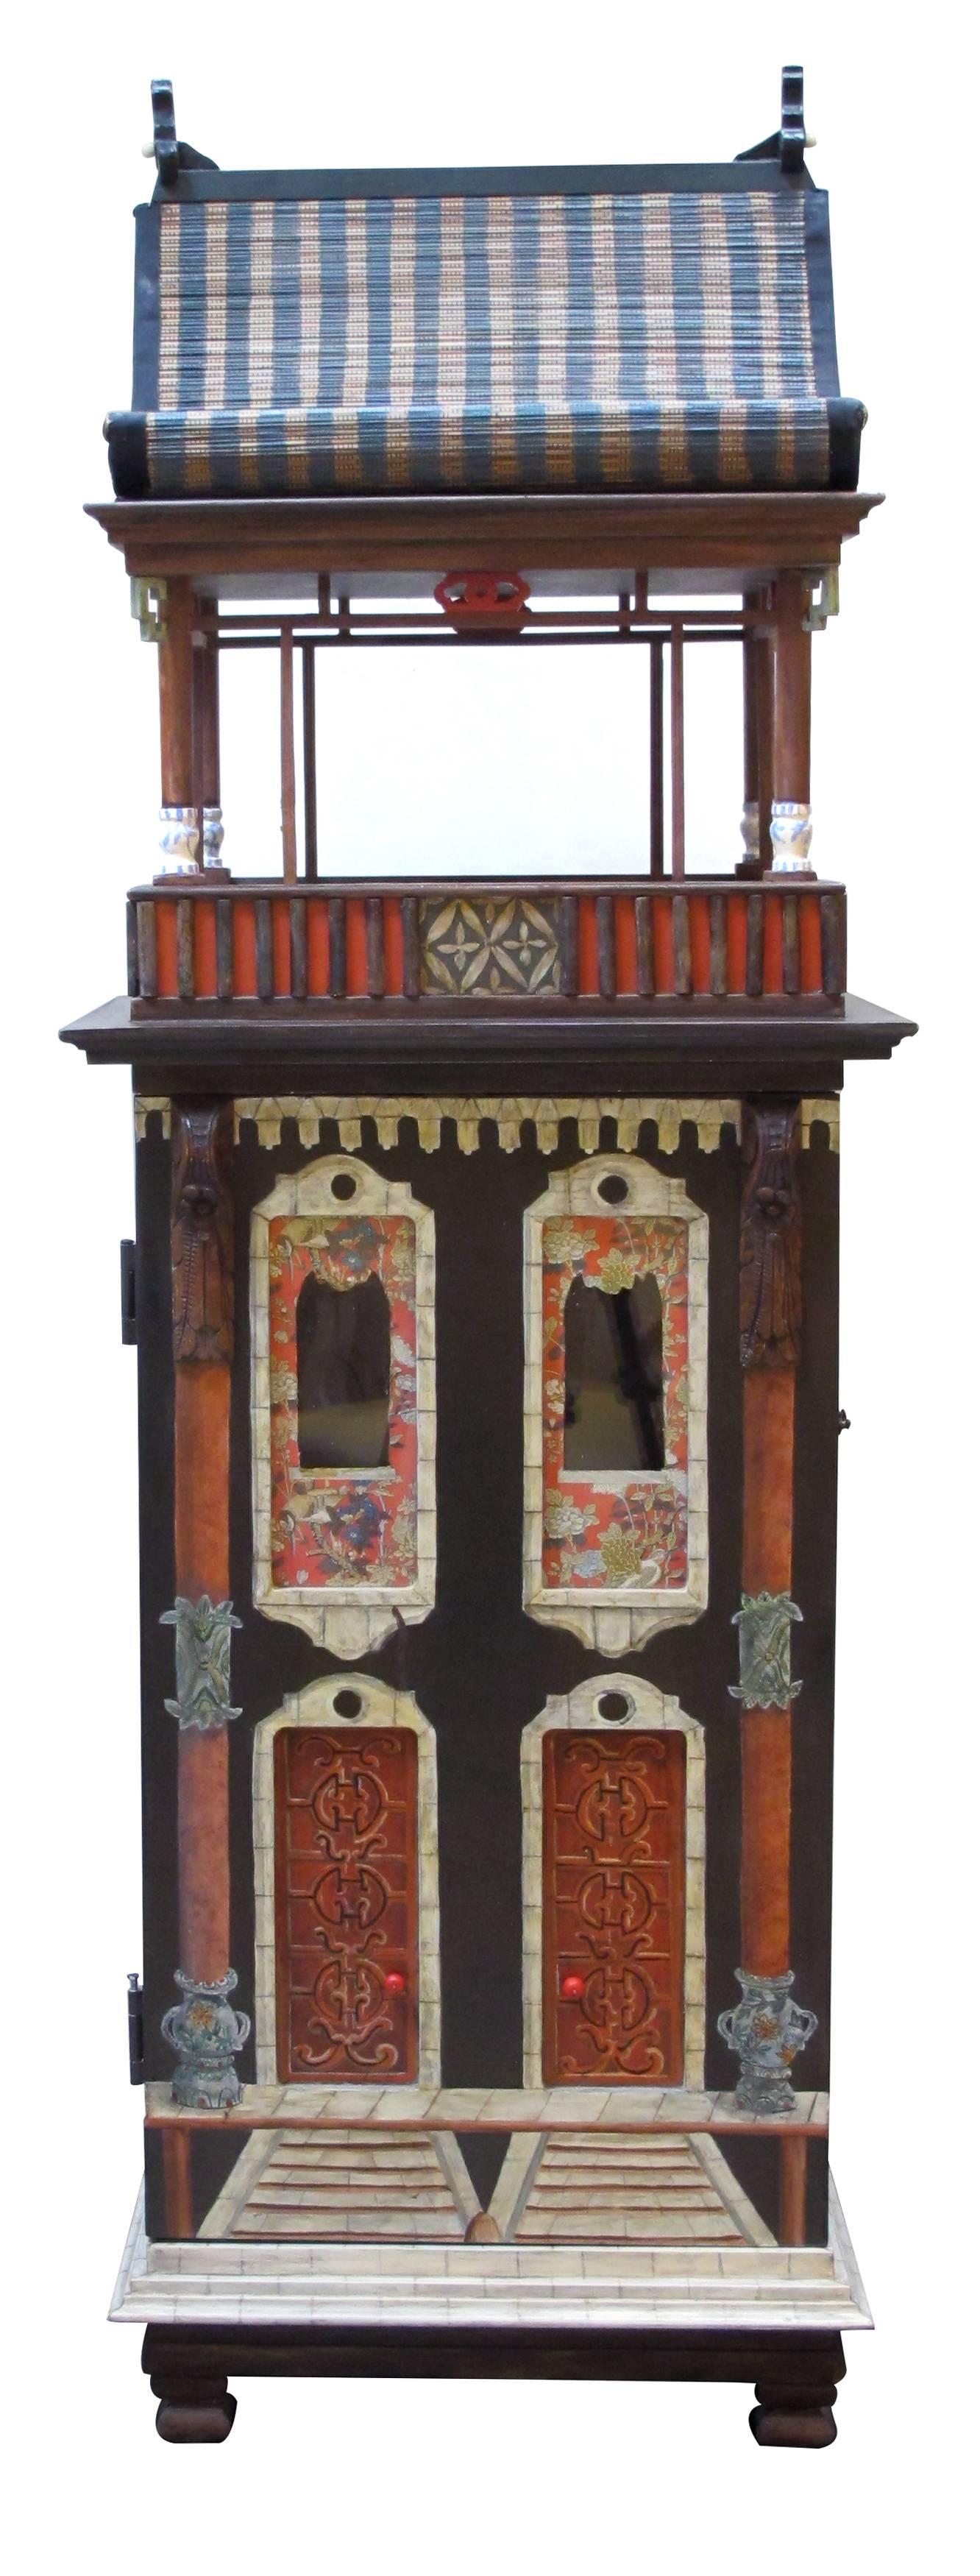 A rare and masterfully crafted wooden hand-painted dollhouse/cabinet of a whimsical Chinese palace by famed artisans Eric and Carole Lansdown; the charming and fanciful palace adorned with painted doors and glass windows; adorned on all sides with